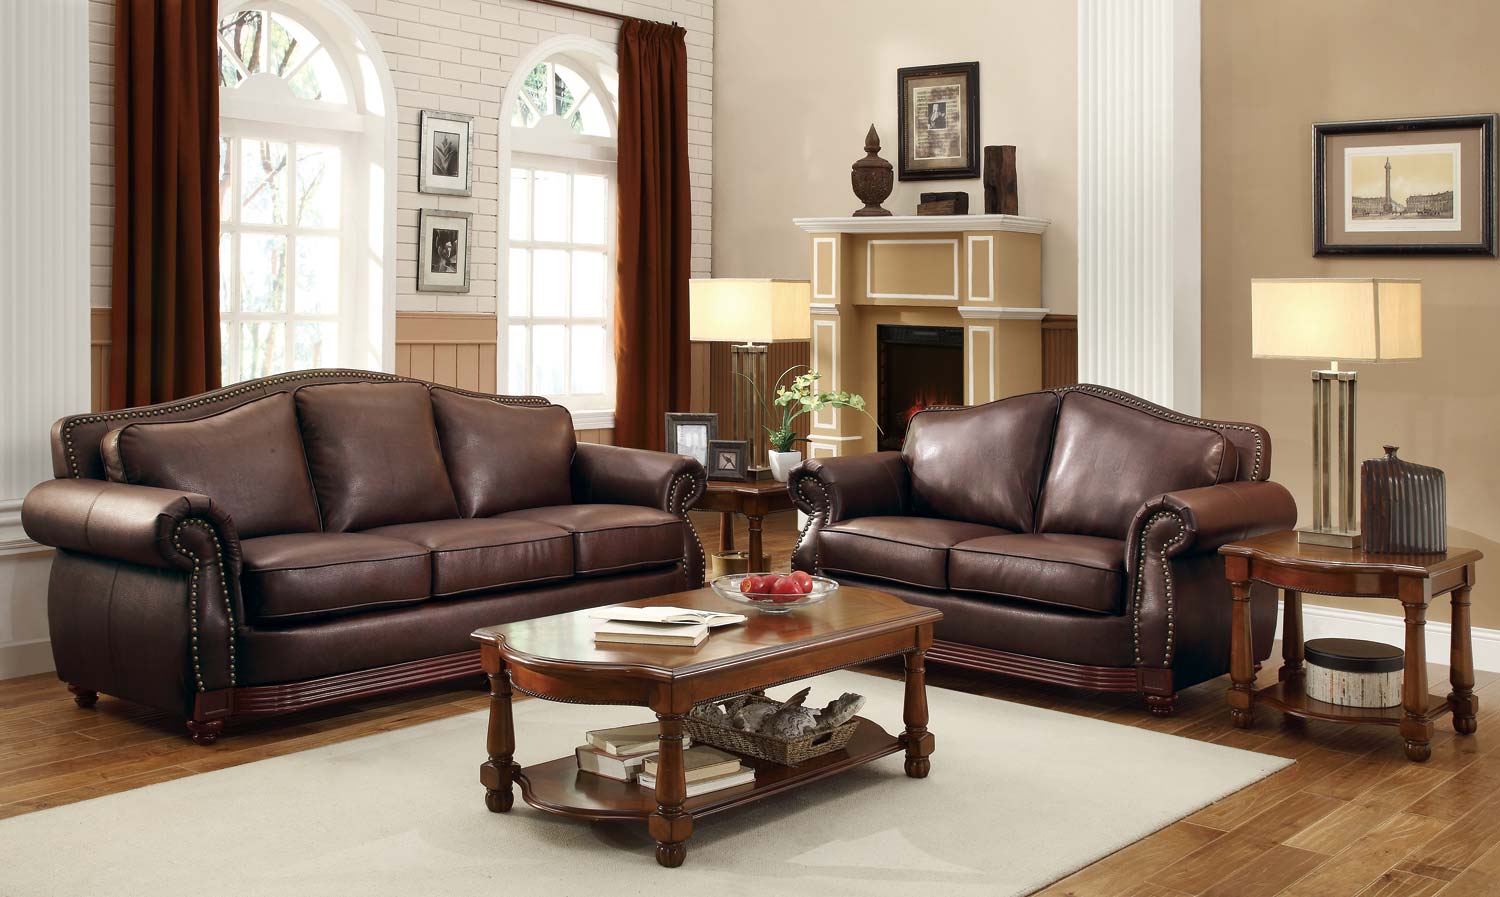 Homelegance Midwood Bonded Leather Sofa Collection - Dark Brown ...